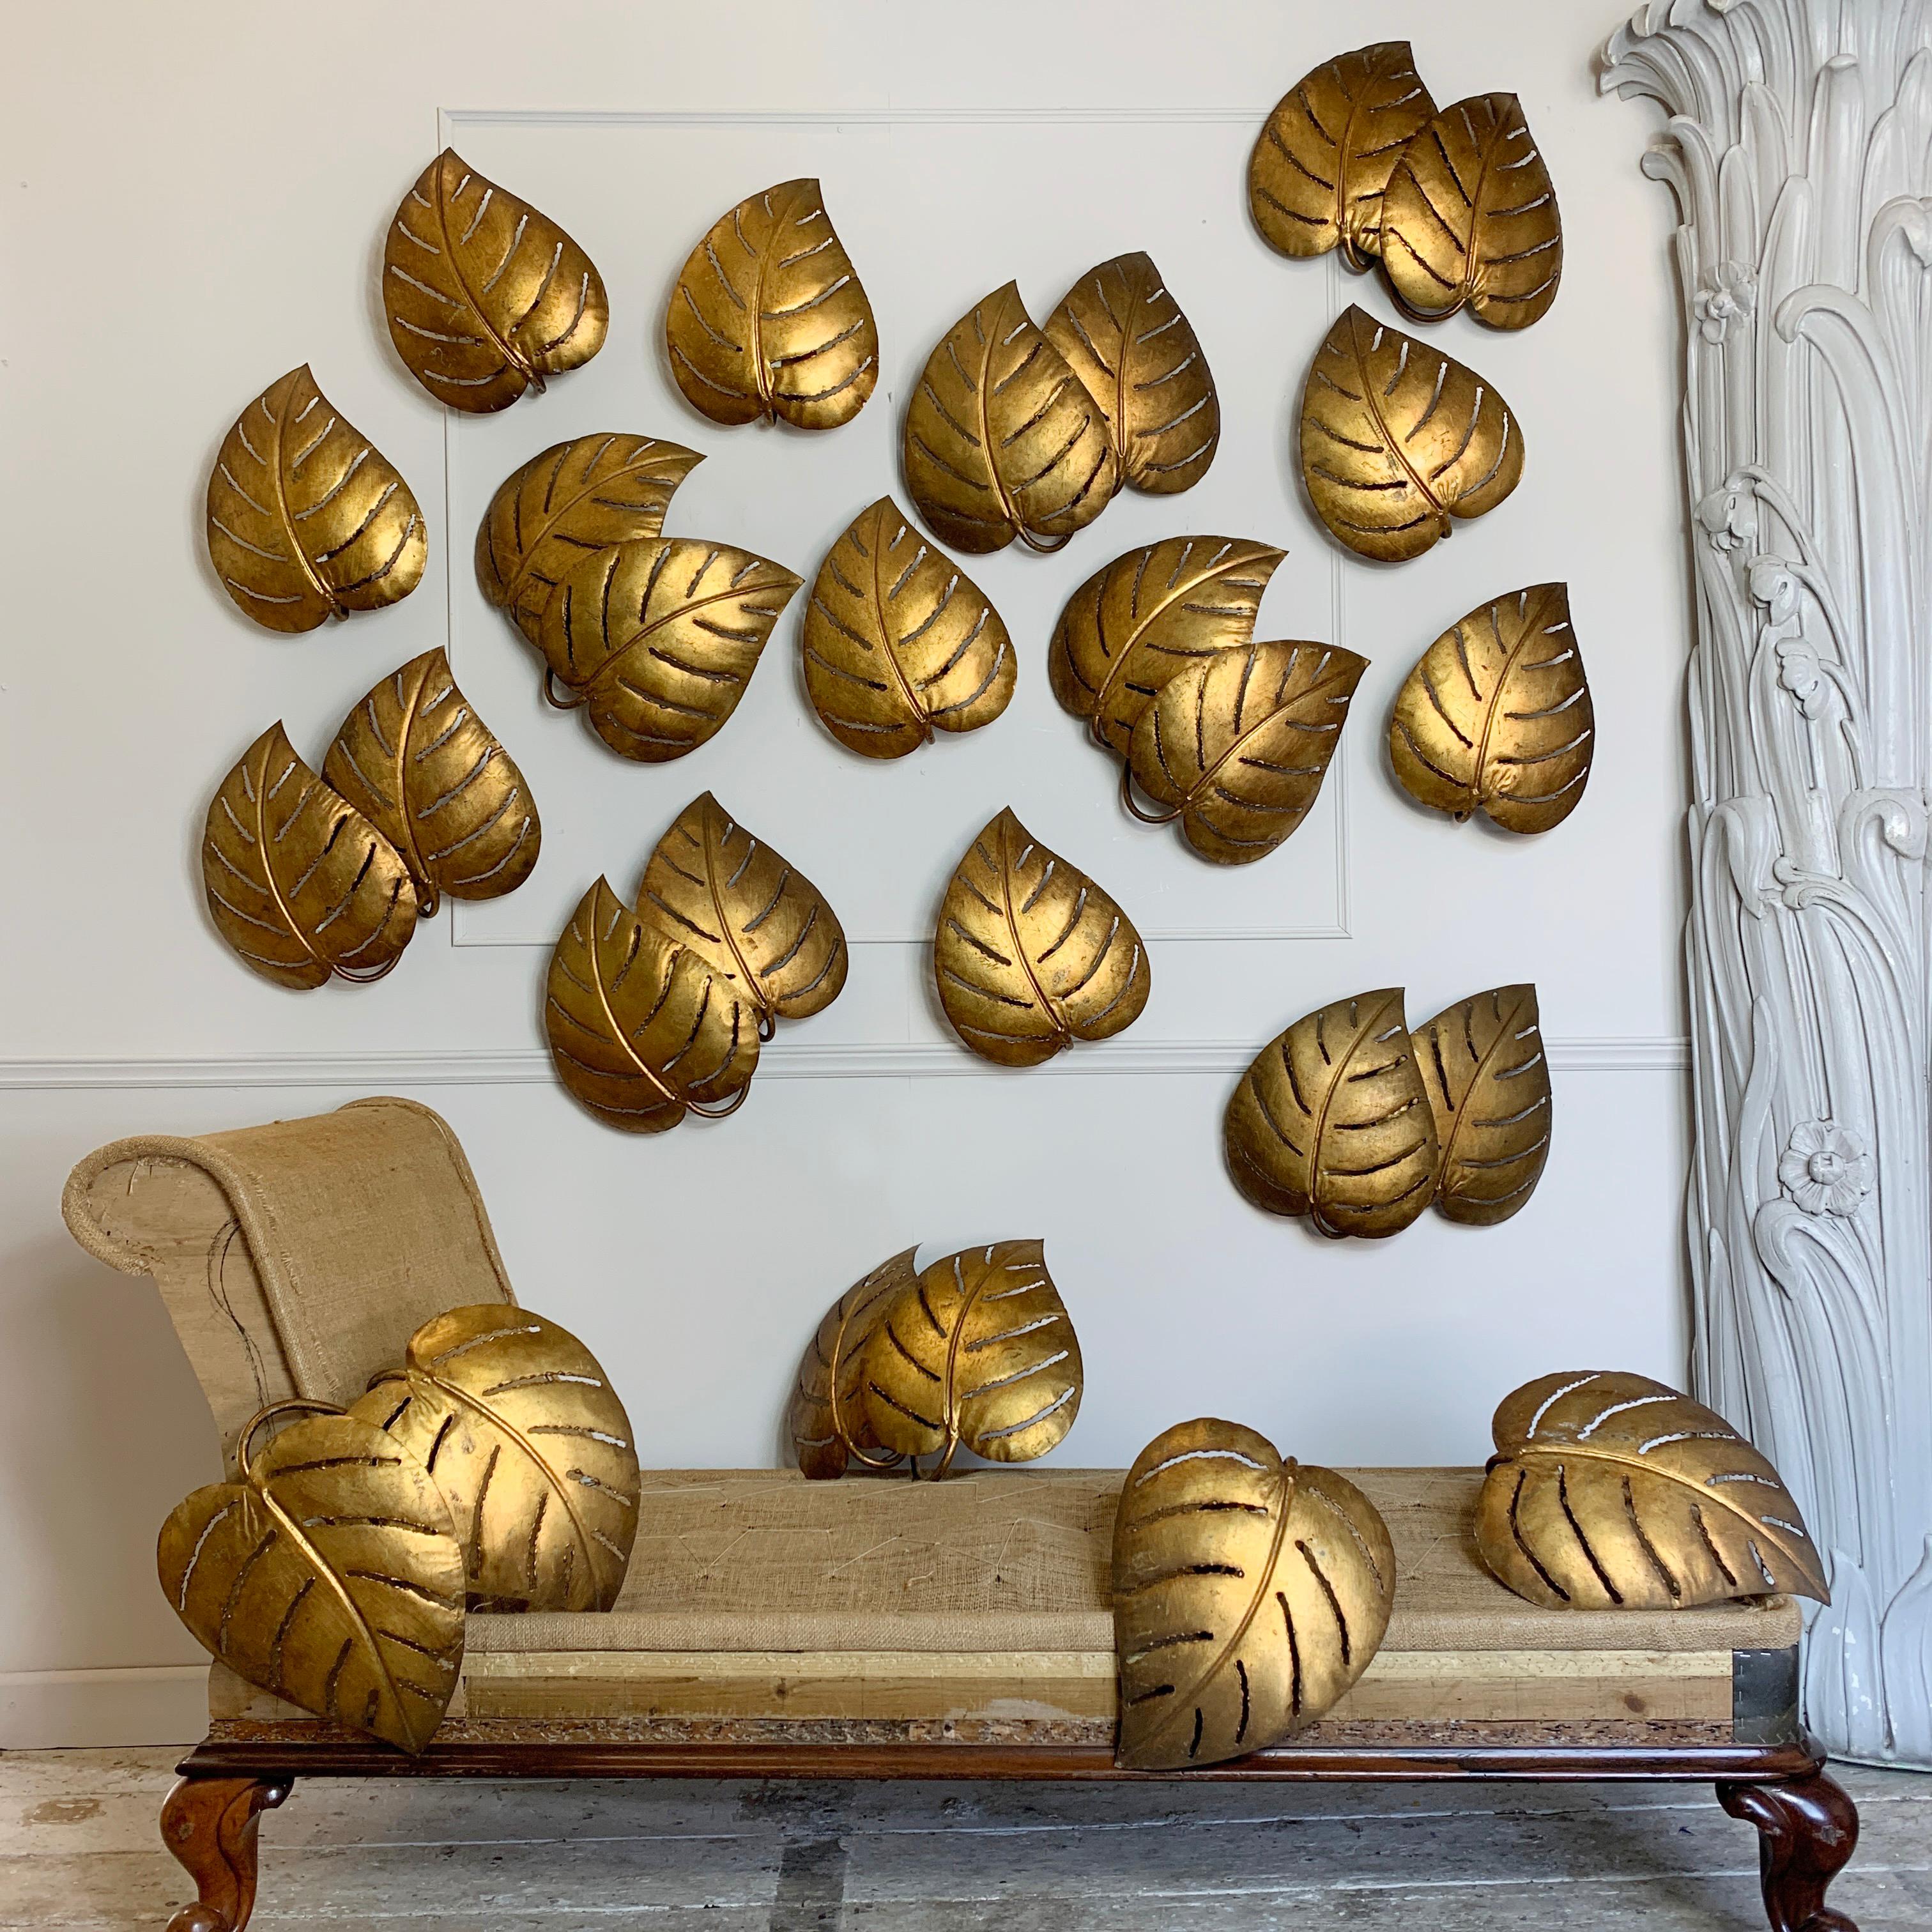 Maison Jansen Monstera single leaf wall lights
Beautiful gilt appliques from the renowned Maison Jansen in Paris
A Brutalist design classic, that brings together the brilliance of the Jansen hand finishing with the French flair for which they are